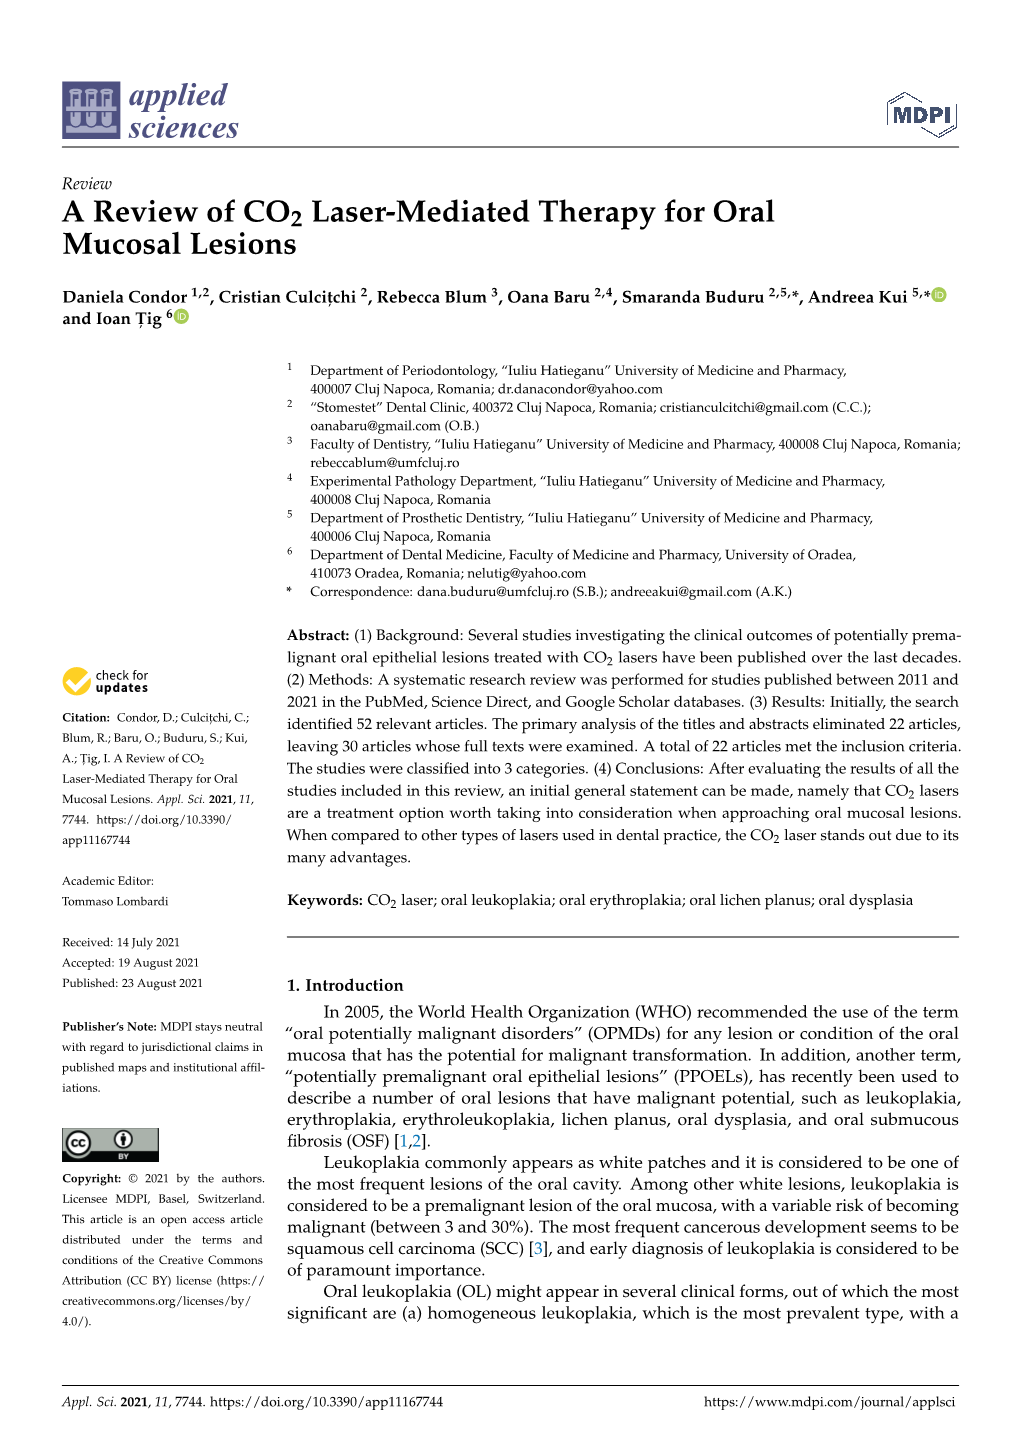 A Review of CO2 Laser-Mediated Therapy for Oral Mucosal Lesions